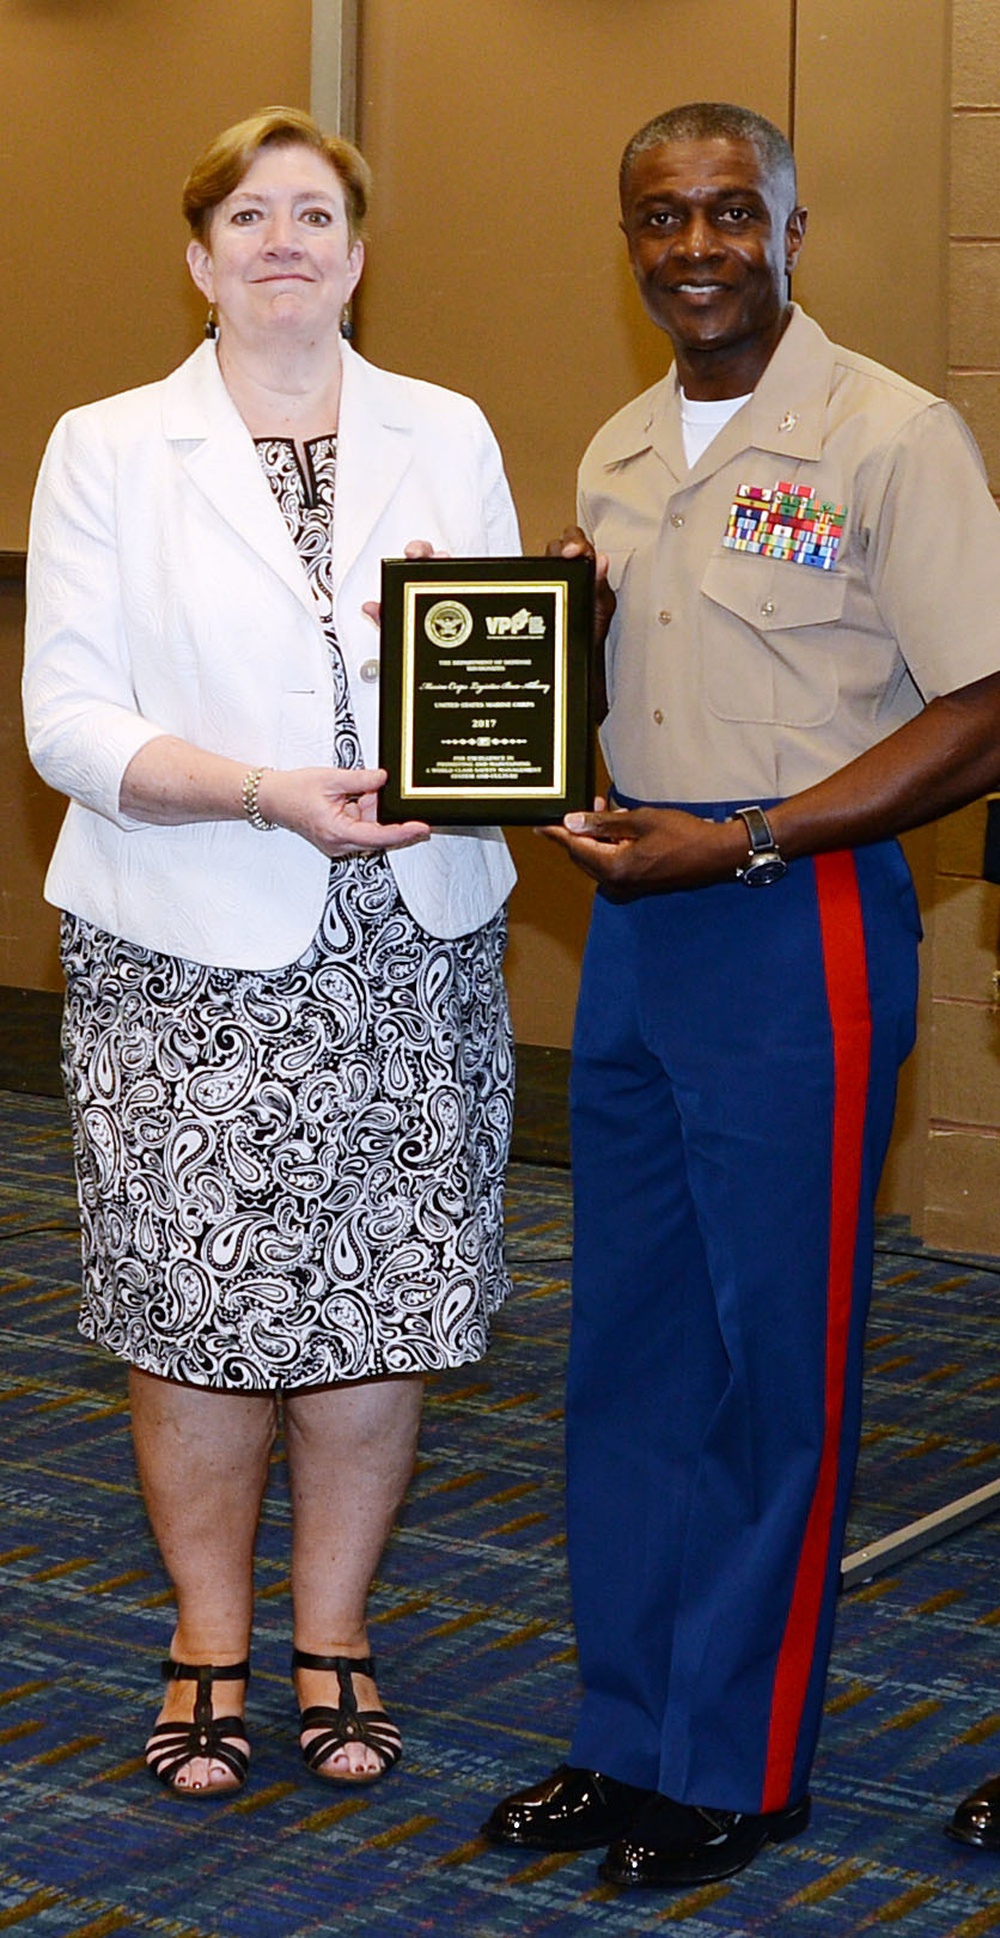 DVIDS News MCLB Albany is ‘star’ at national VPP conference